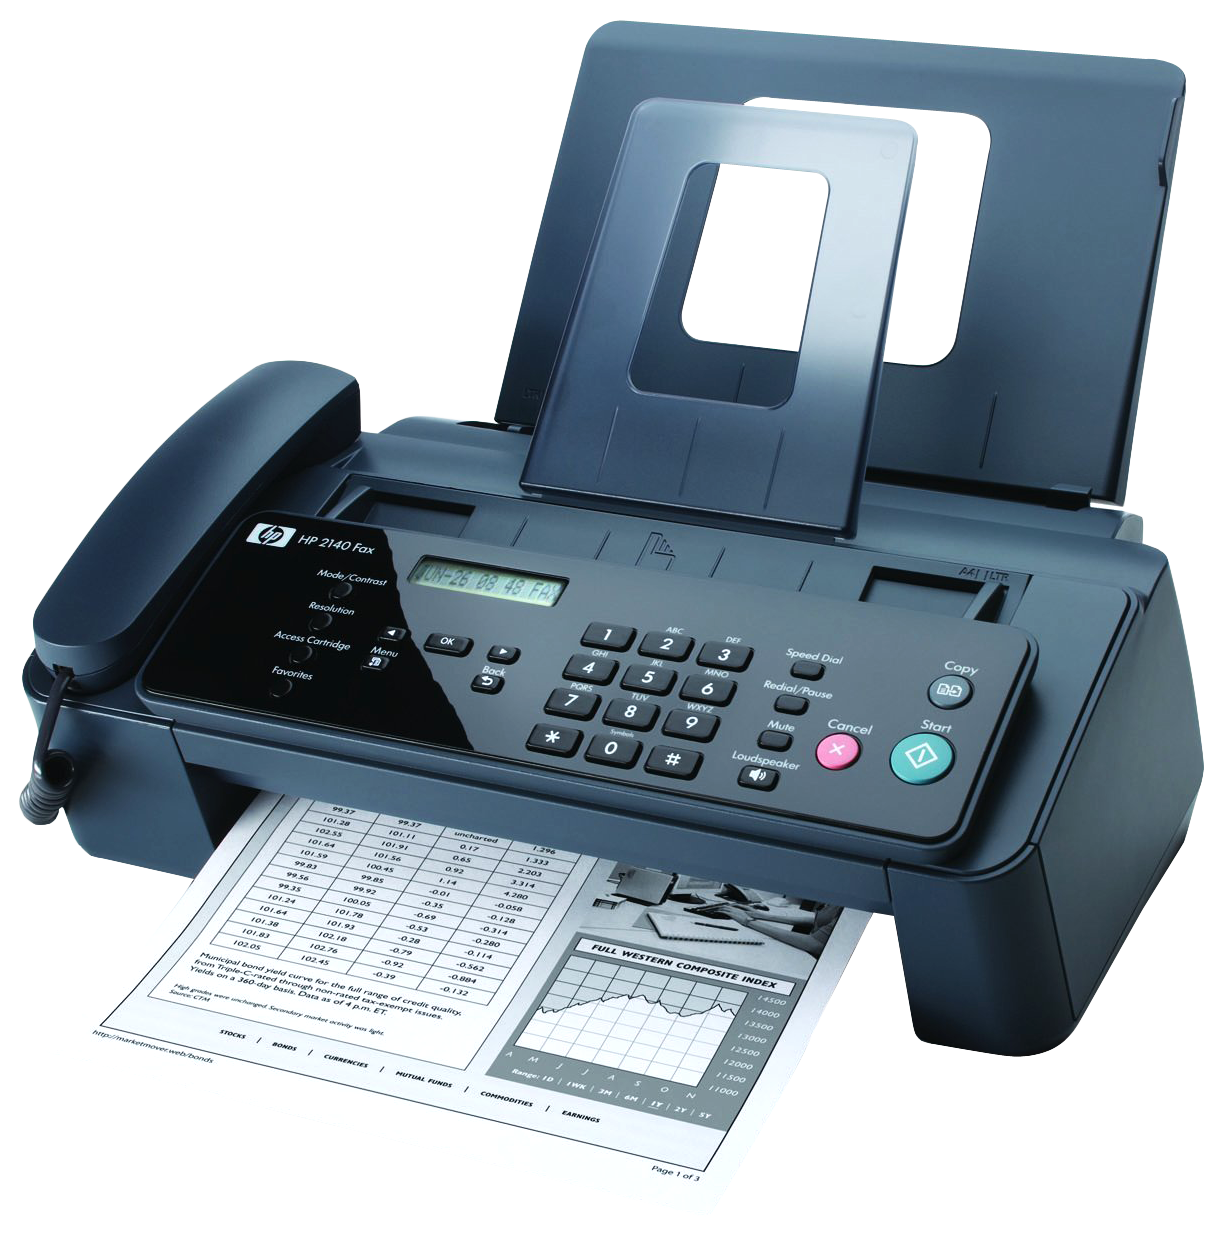 Fax Machine PNG Background Image